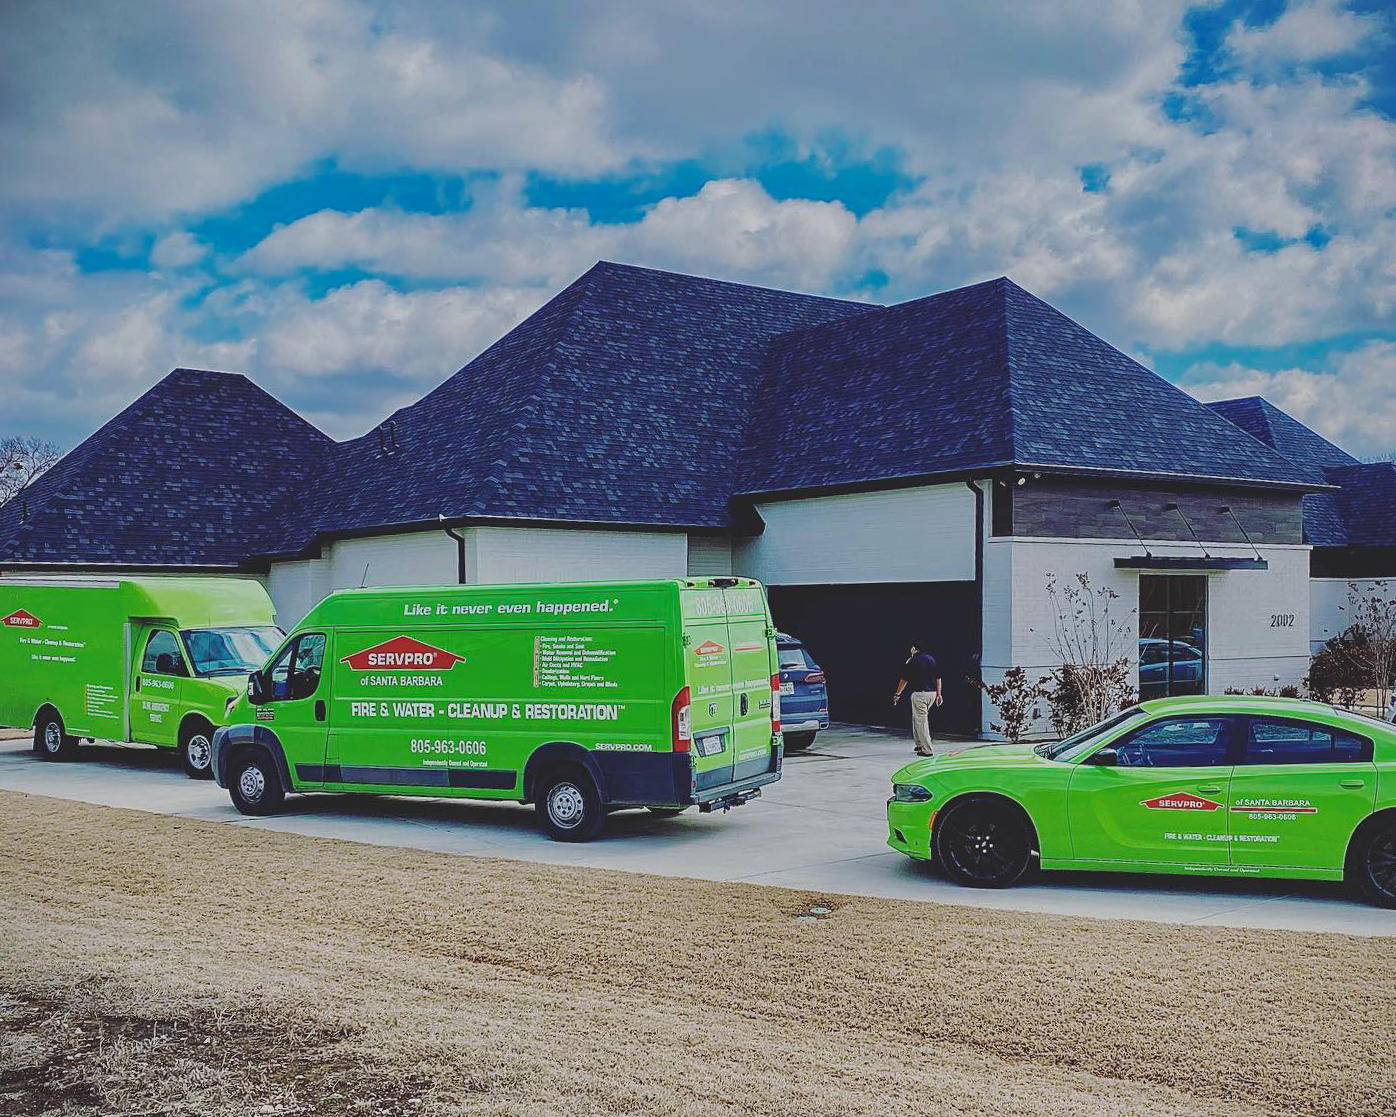 SERVPRO of Santa Barbara and SERVPRO of Santa Ynez / Goleta can handle any size commercial water damage.